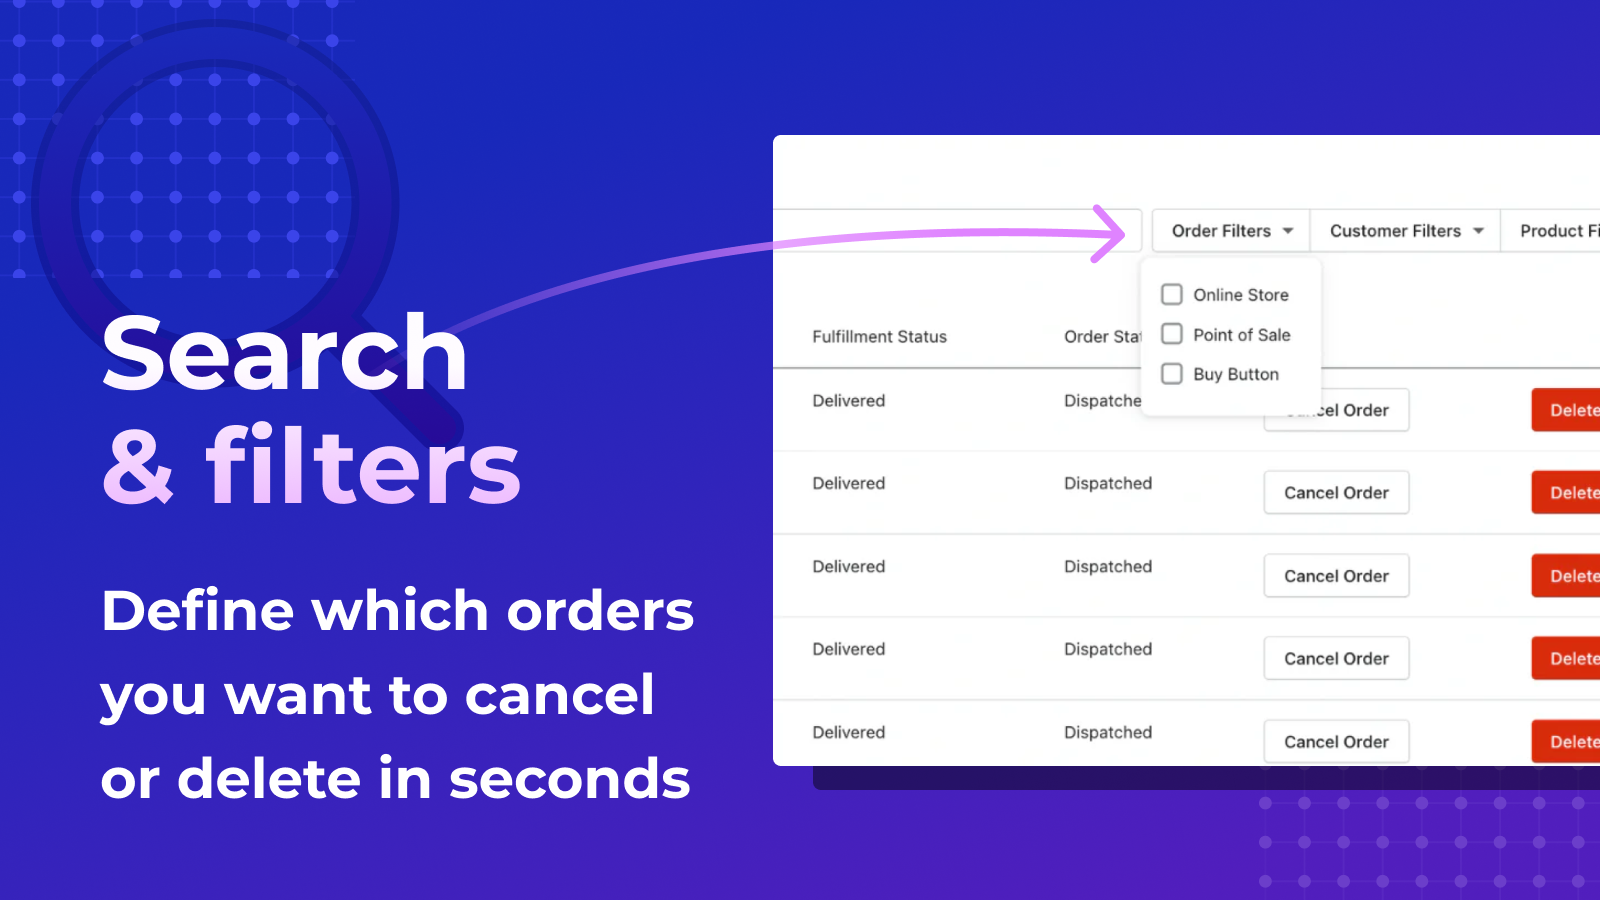 Filter orders so you can easily cancel or delete them